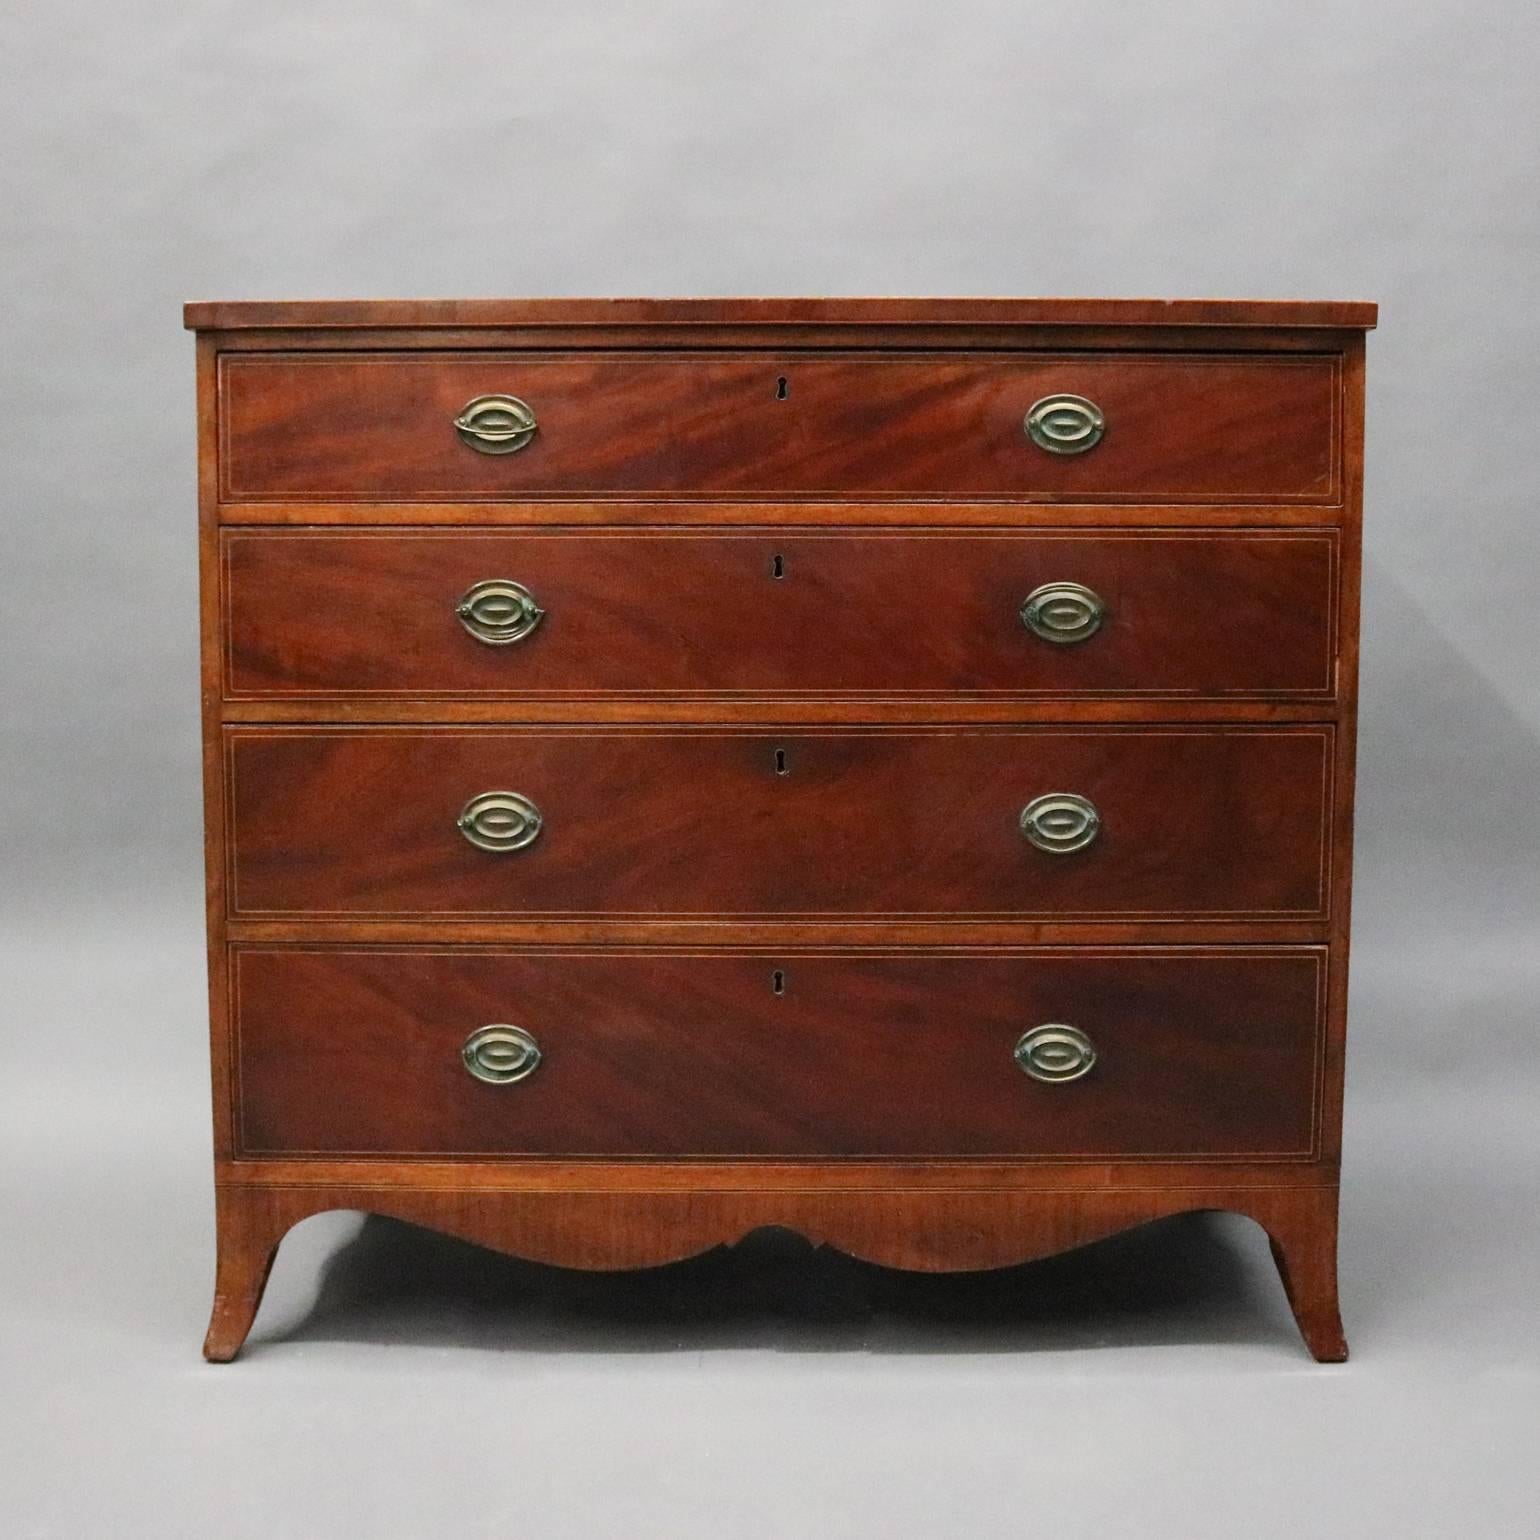 Antique English Hepplewhite flame mahogany chest of drawers with five satinwood inlaid banded long drawers, cast bronze pulls, circa 1830

Measures: 40" H x 44" W x 21" D.